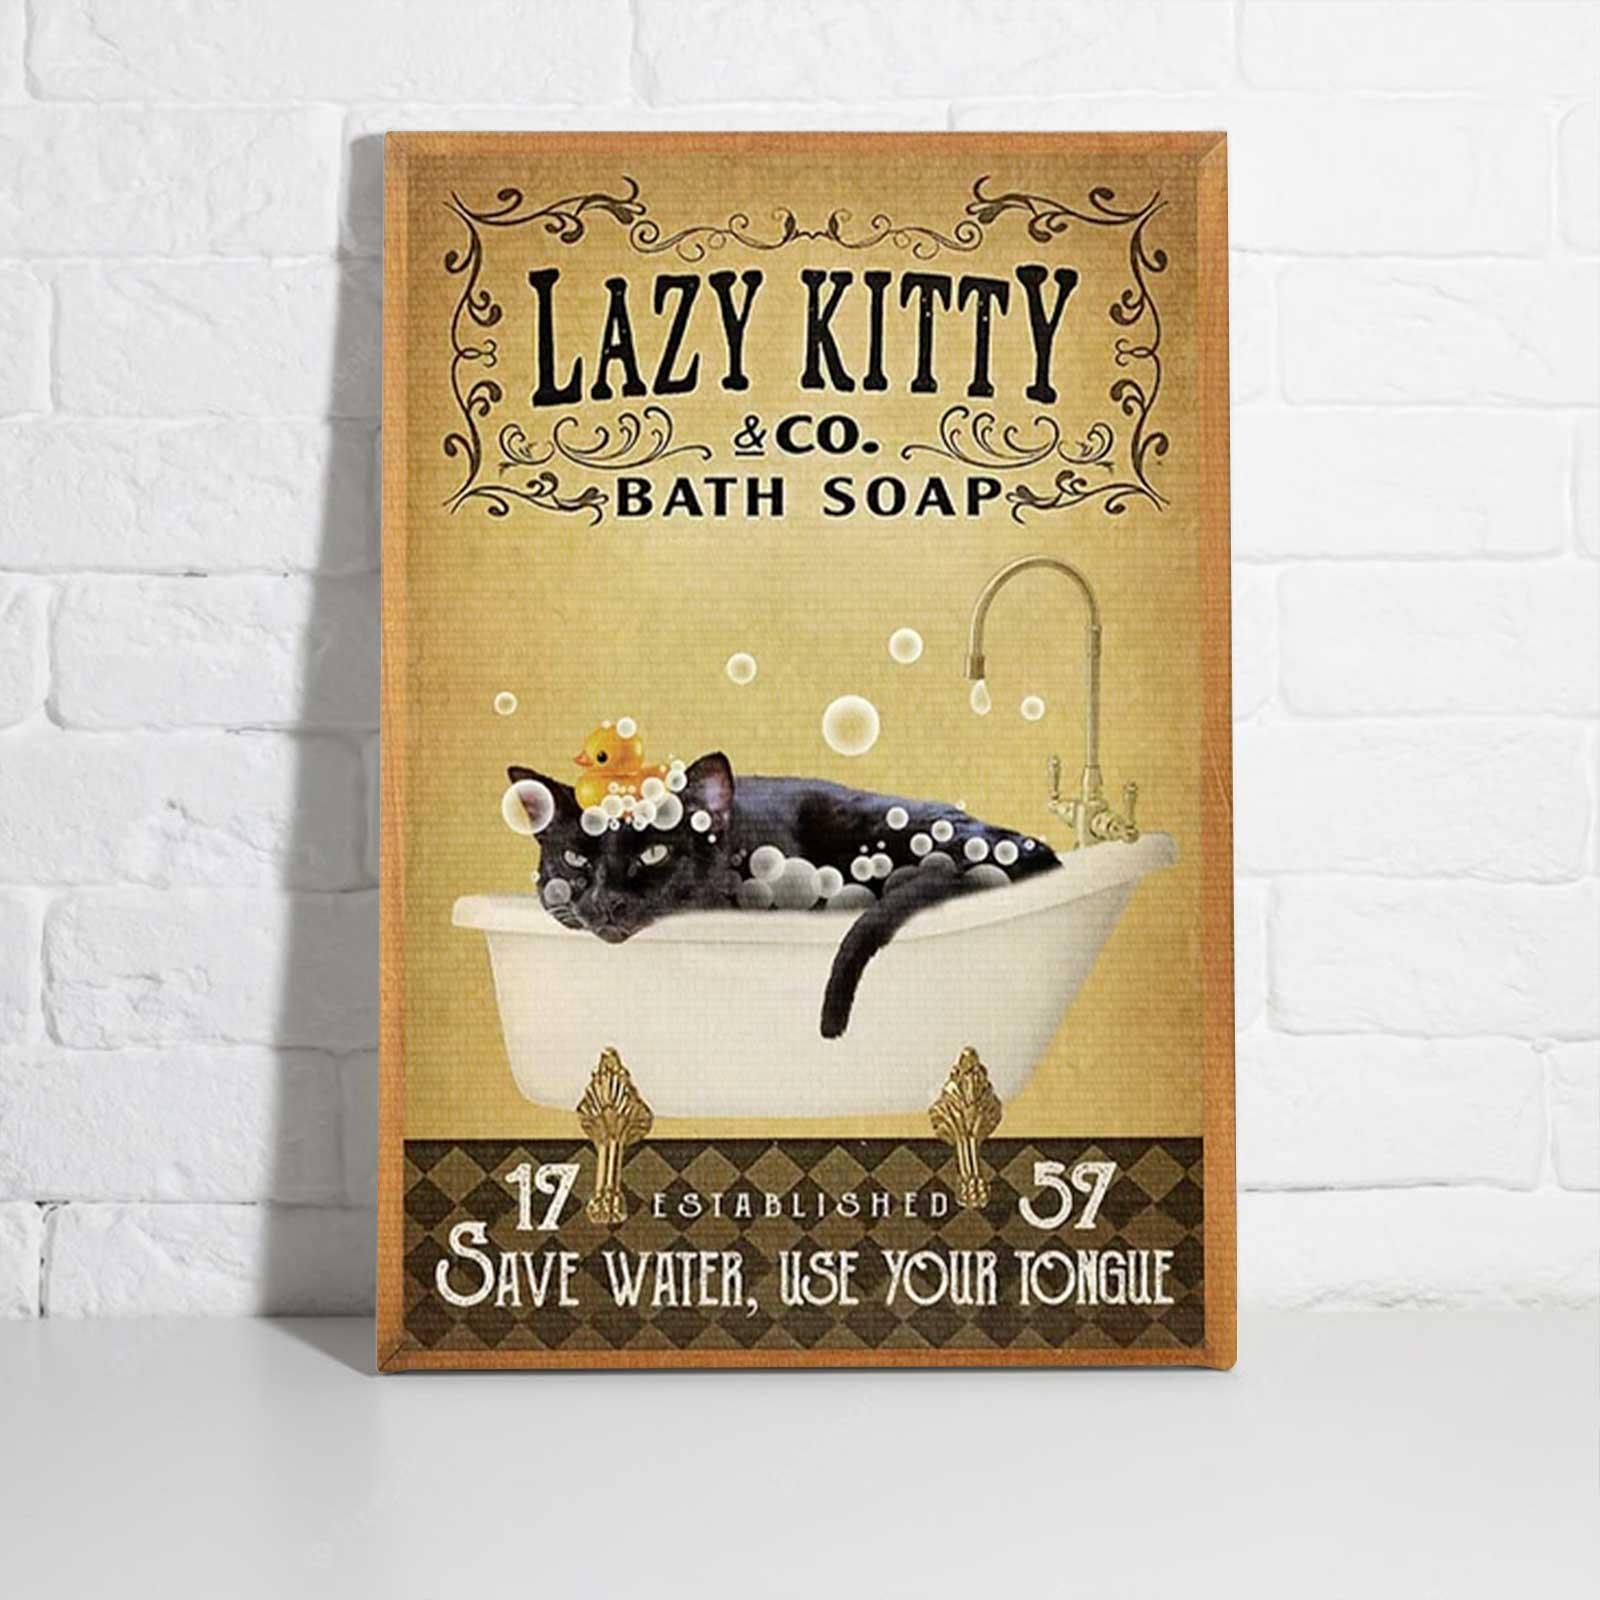 Black Kitty Portrait Canvas - Lazy Kitty Bath Soap Saver Water, Use Your Tongue Premium Wrapped Canvas - Perfect Gift For Black Cat Lover - Amzanimalsgift